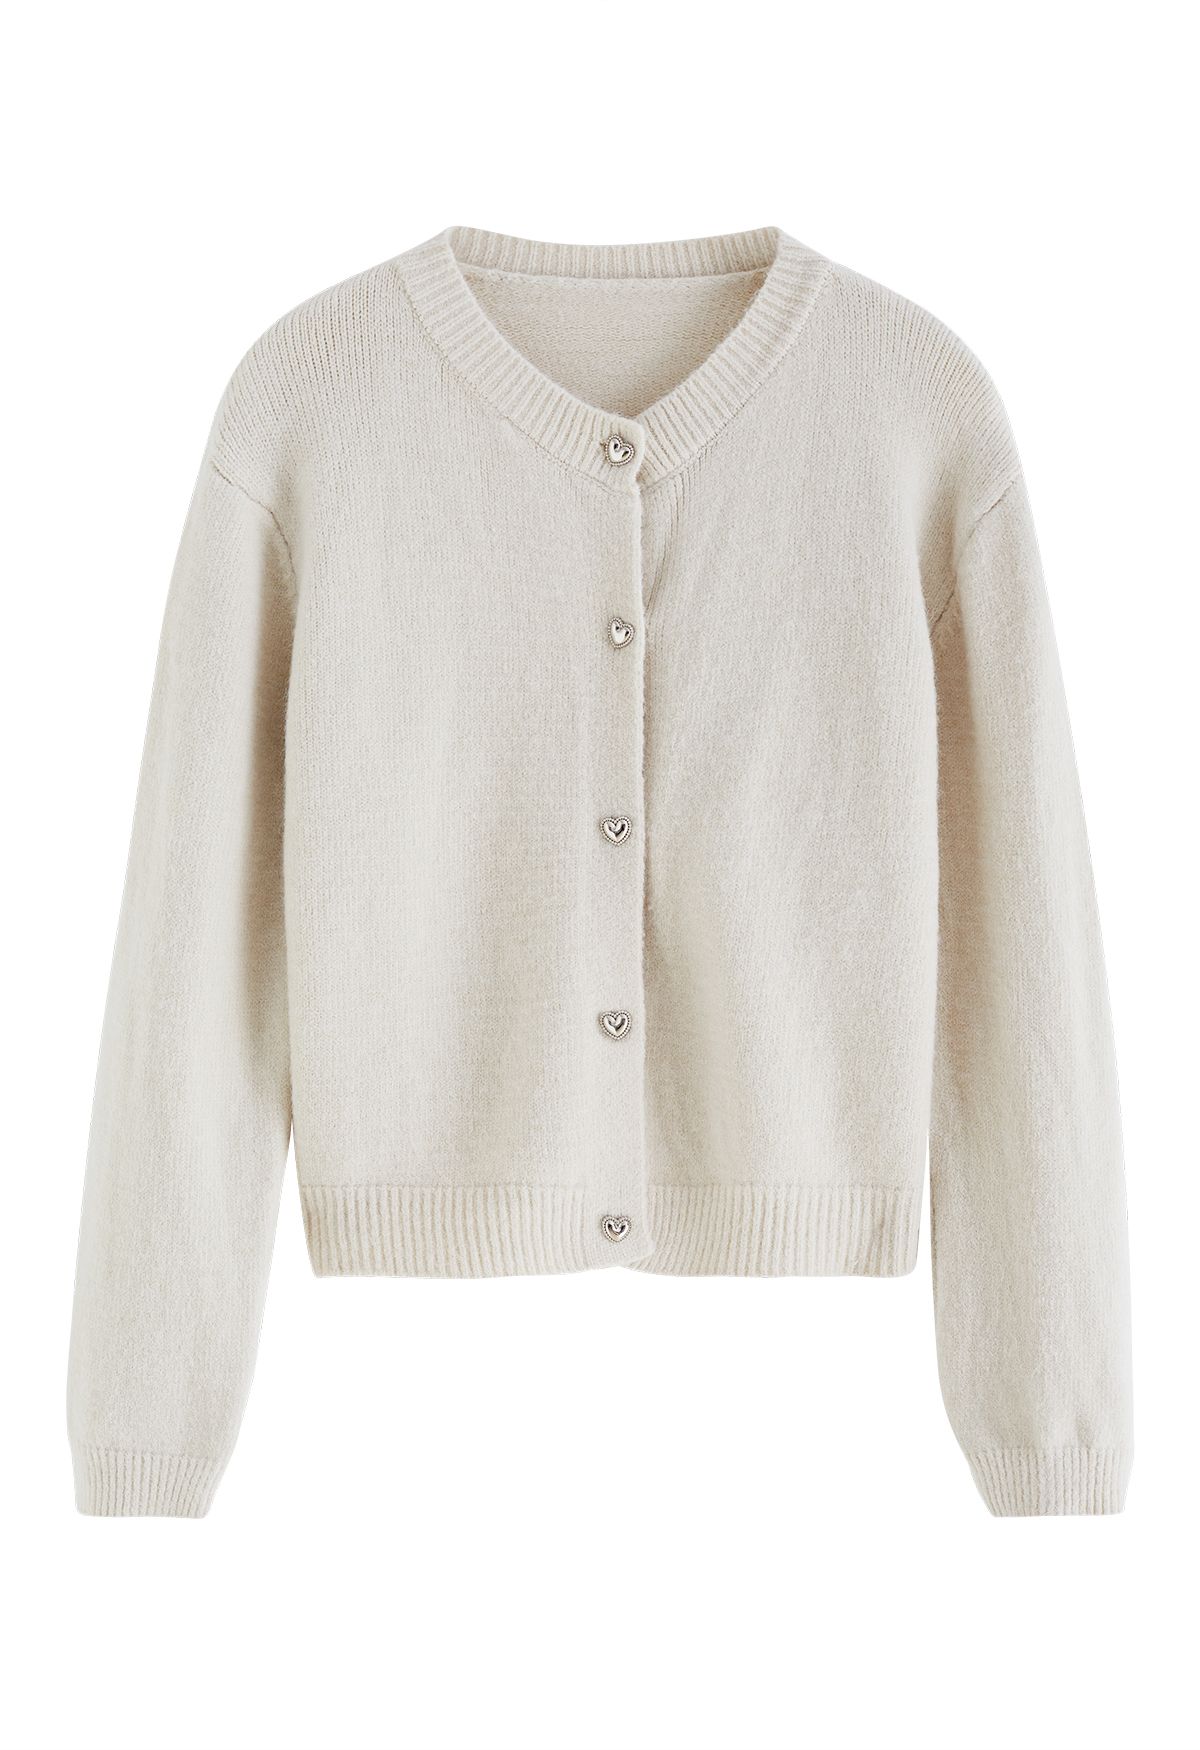 Heart-Shape Button Cropped Knit Cardigan in Ivory